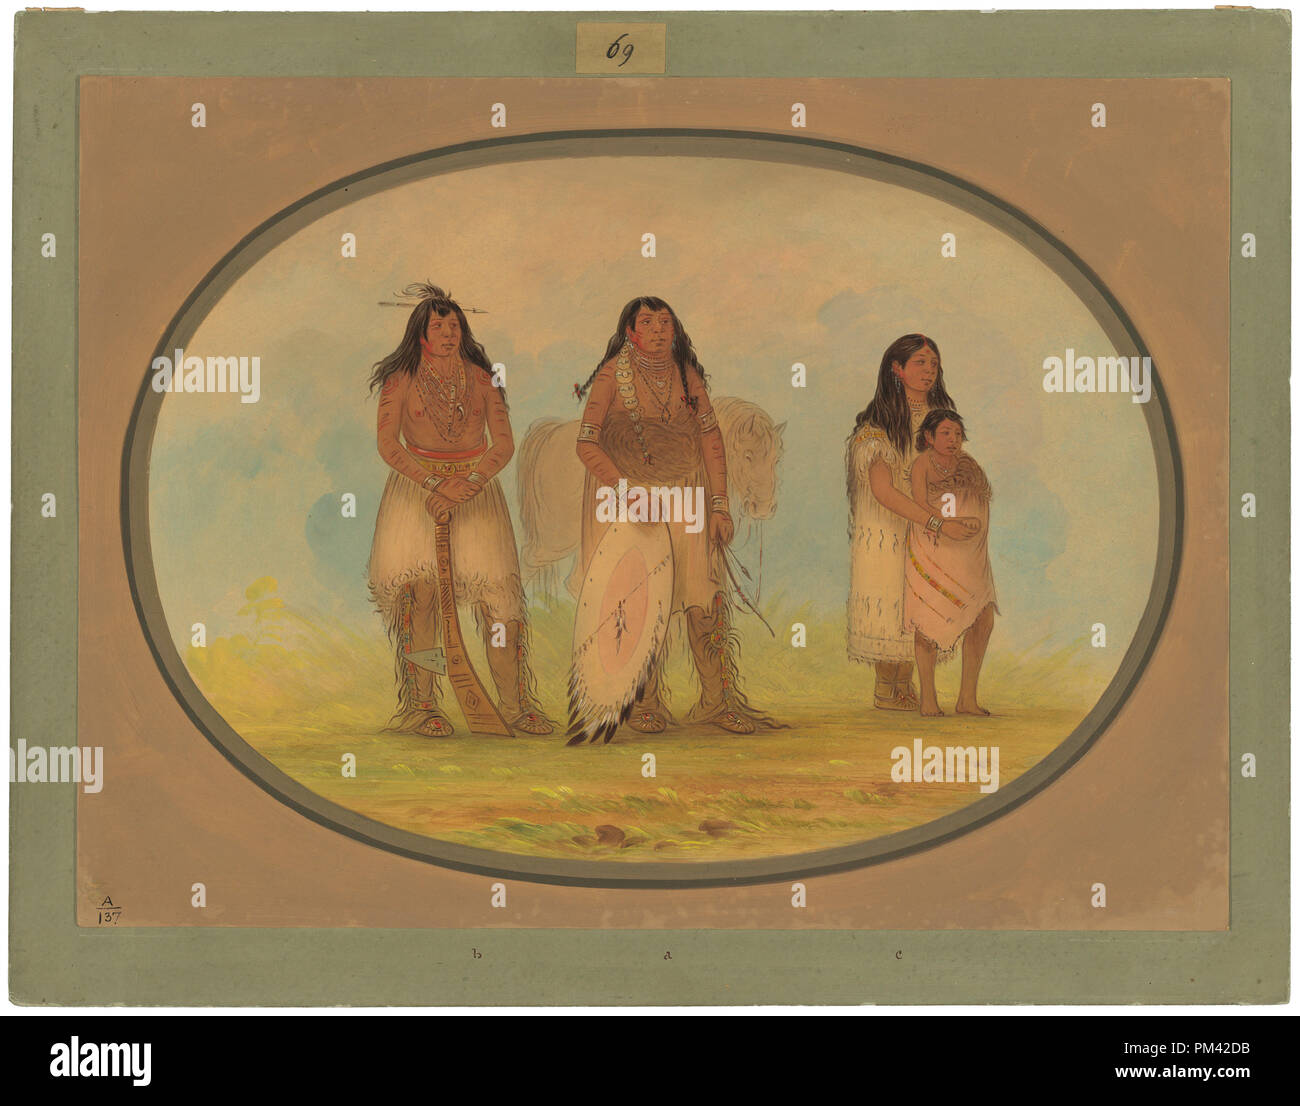 Four Kiowa Indians. Dated: 1861/1869. Dimensions: overall: 46.9 x 63.3 cm (18 7/16 x 24 15/16 in.). Medium: oil on card mounted on paperboard. Museum: National Gallery of Art, Washington DC. Author: George Catlin. Stock Photo